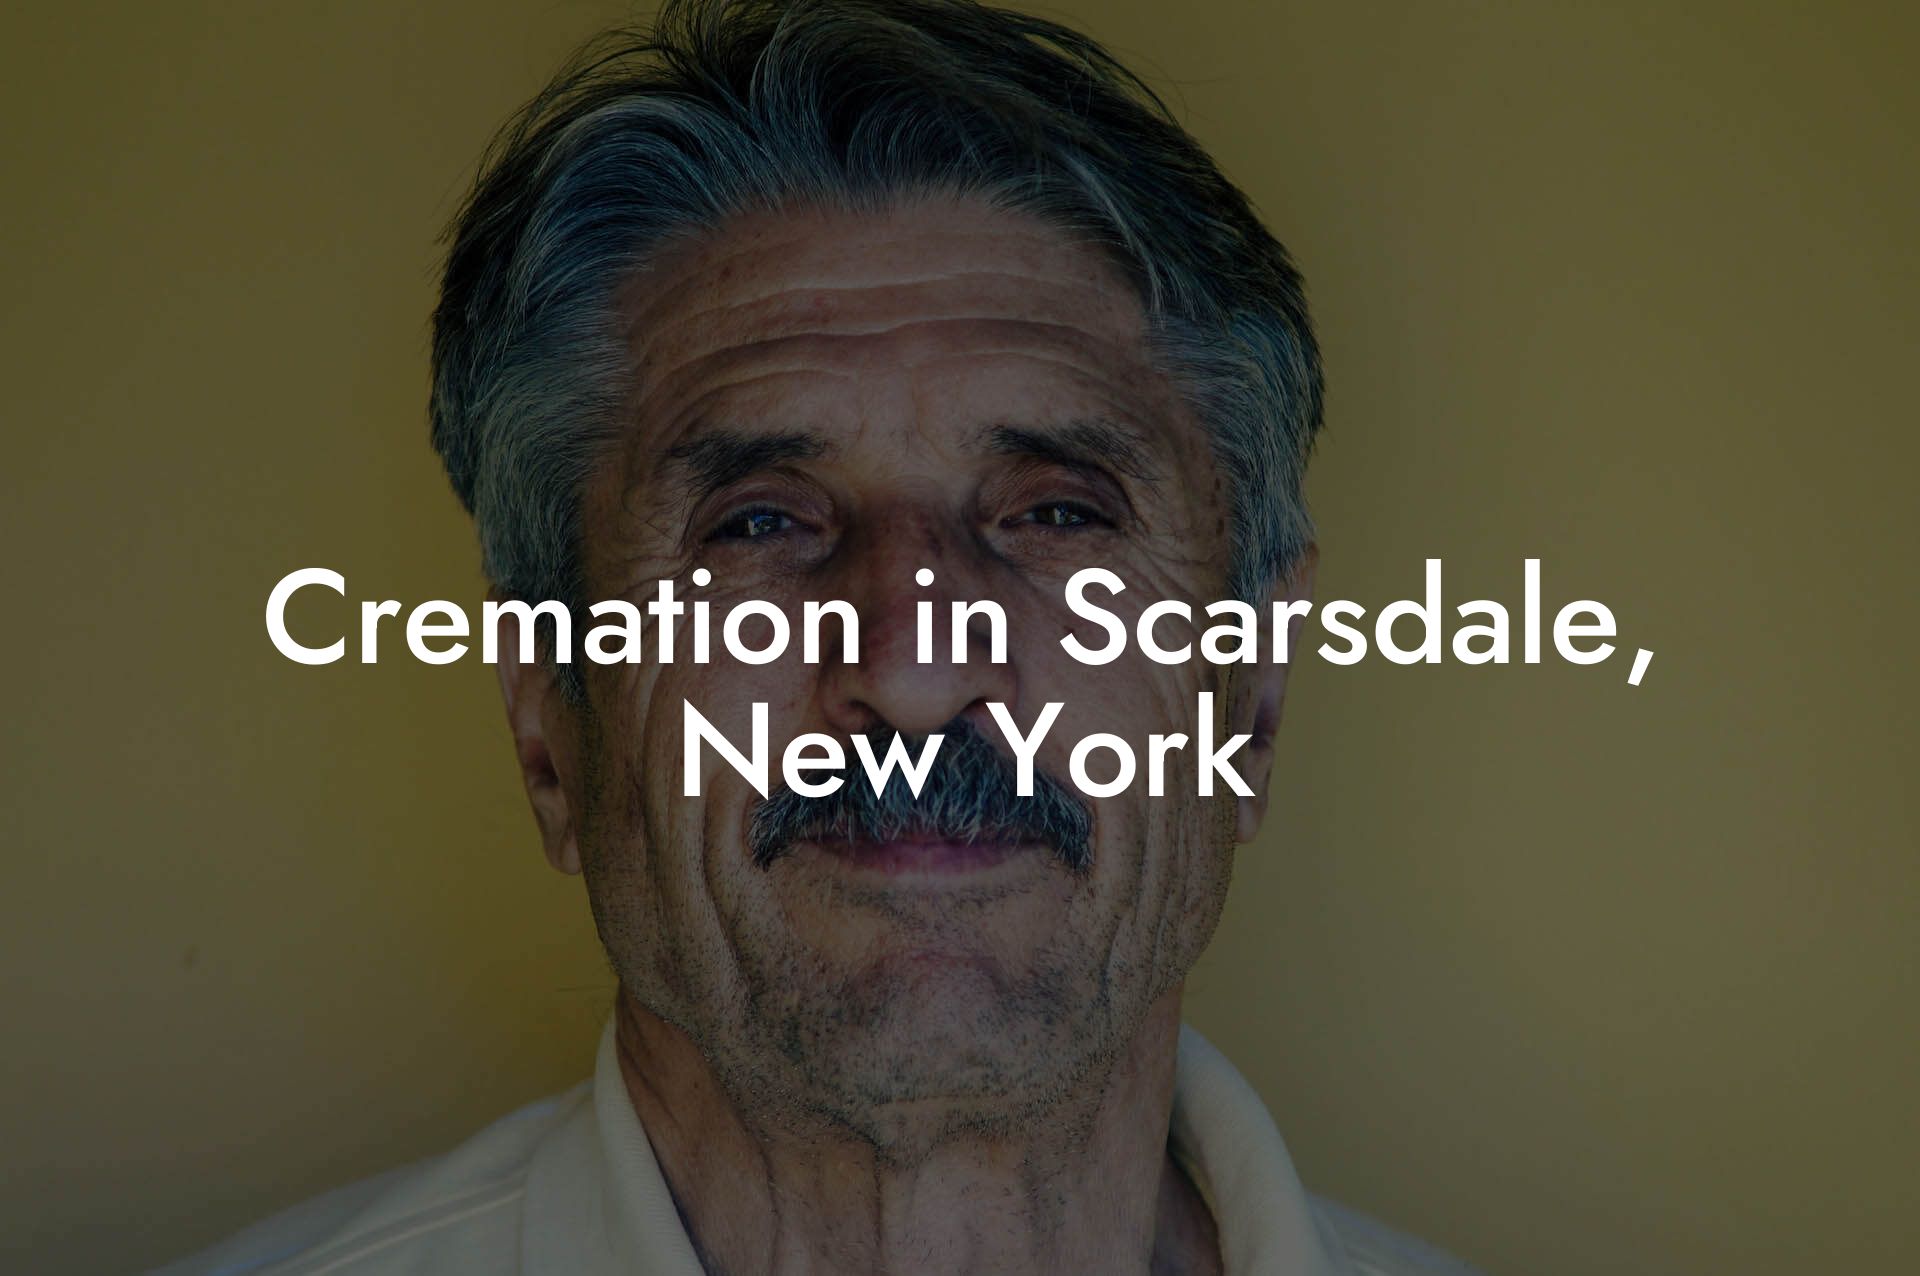 Cremation in Scarsdale, New York